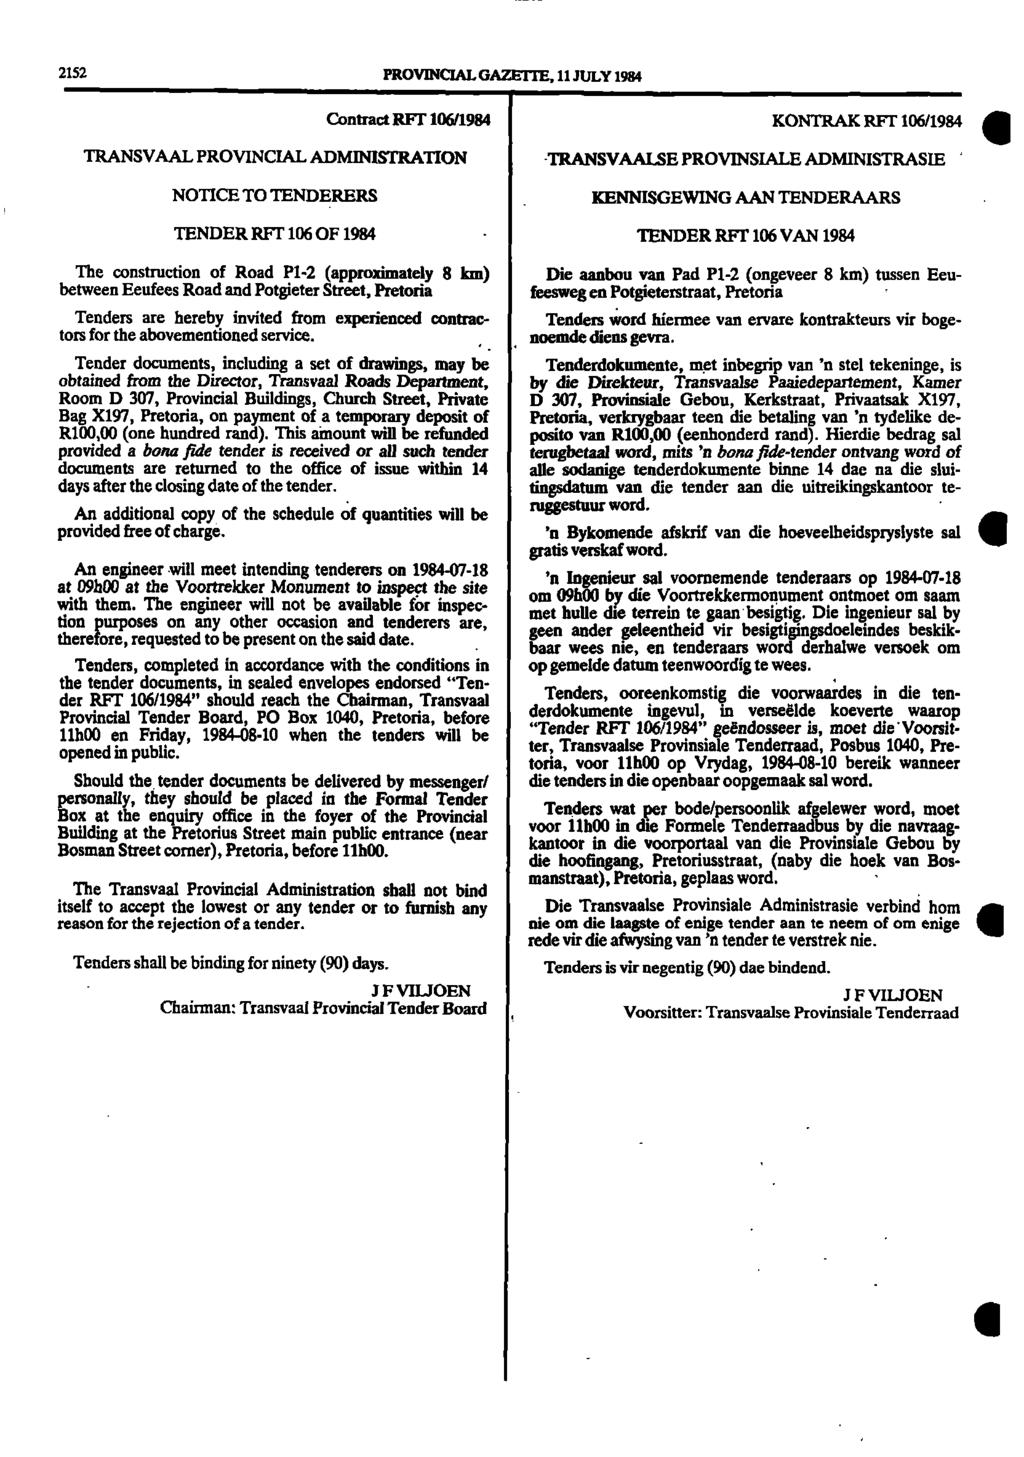 2152 PROVINCIAL GAMITE 11 JULY 1984 Contract RFT 106/1984 KONTRAK RFT 106/1984 TRANSVAAL PROVINCIAL ADMINISTRATION NOTICE TO TENDERERS TRANSVAALSE PROVINSIALE ADMINISTRASIE KENNISGEWING AAN